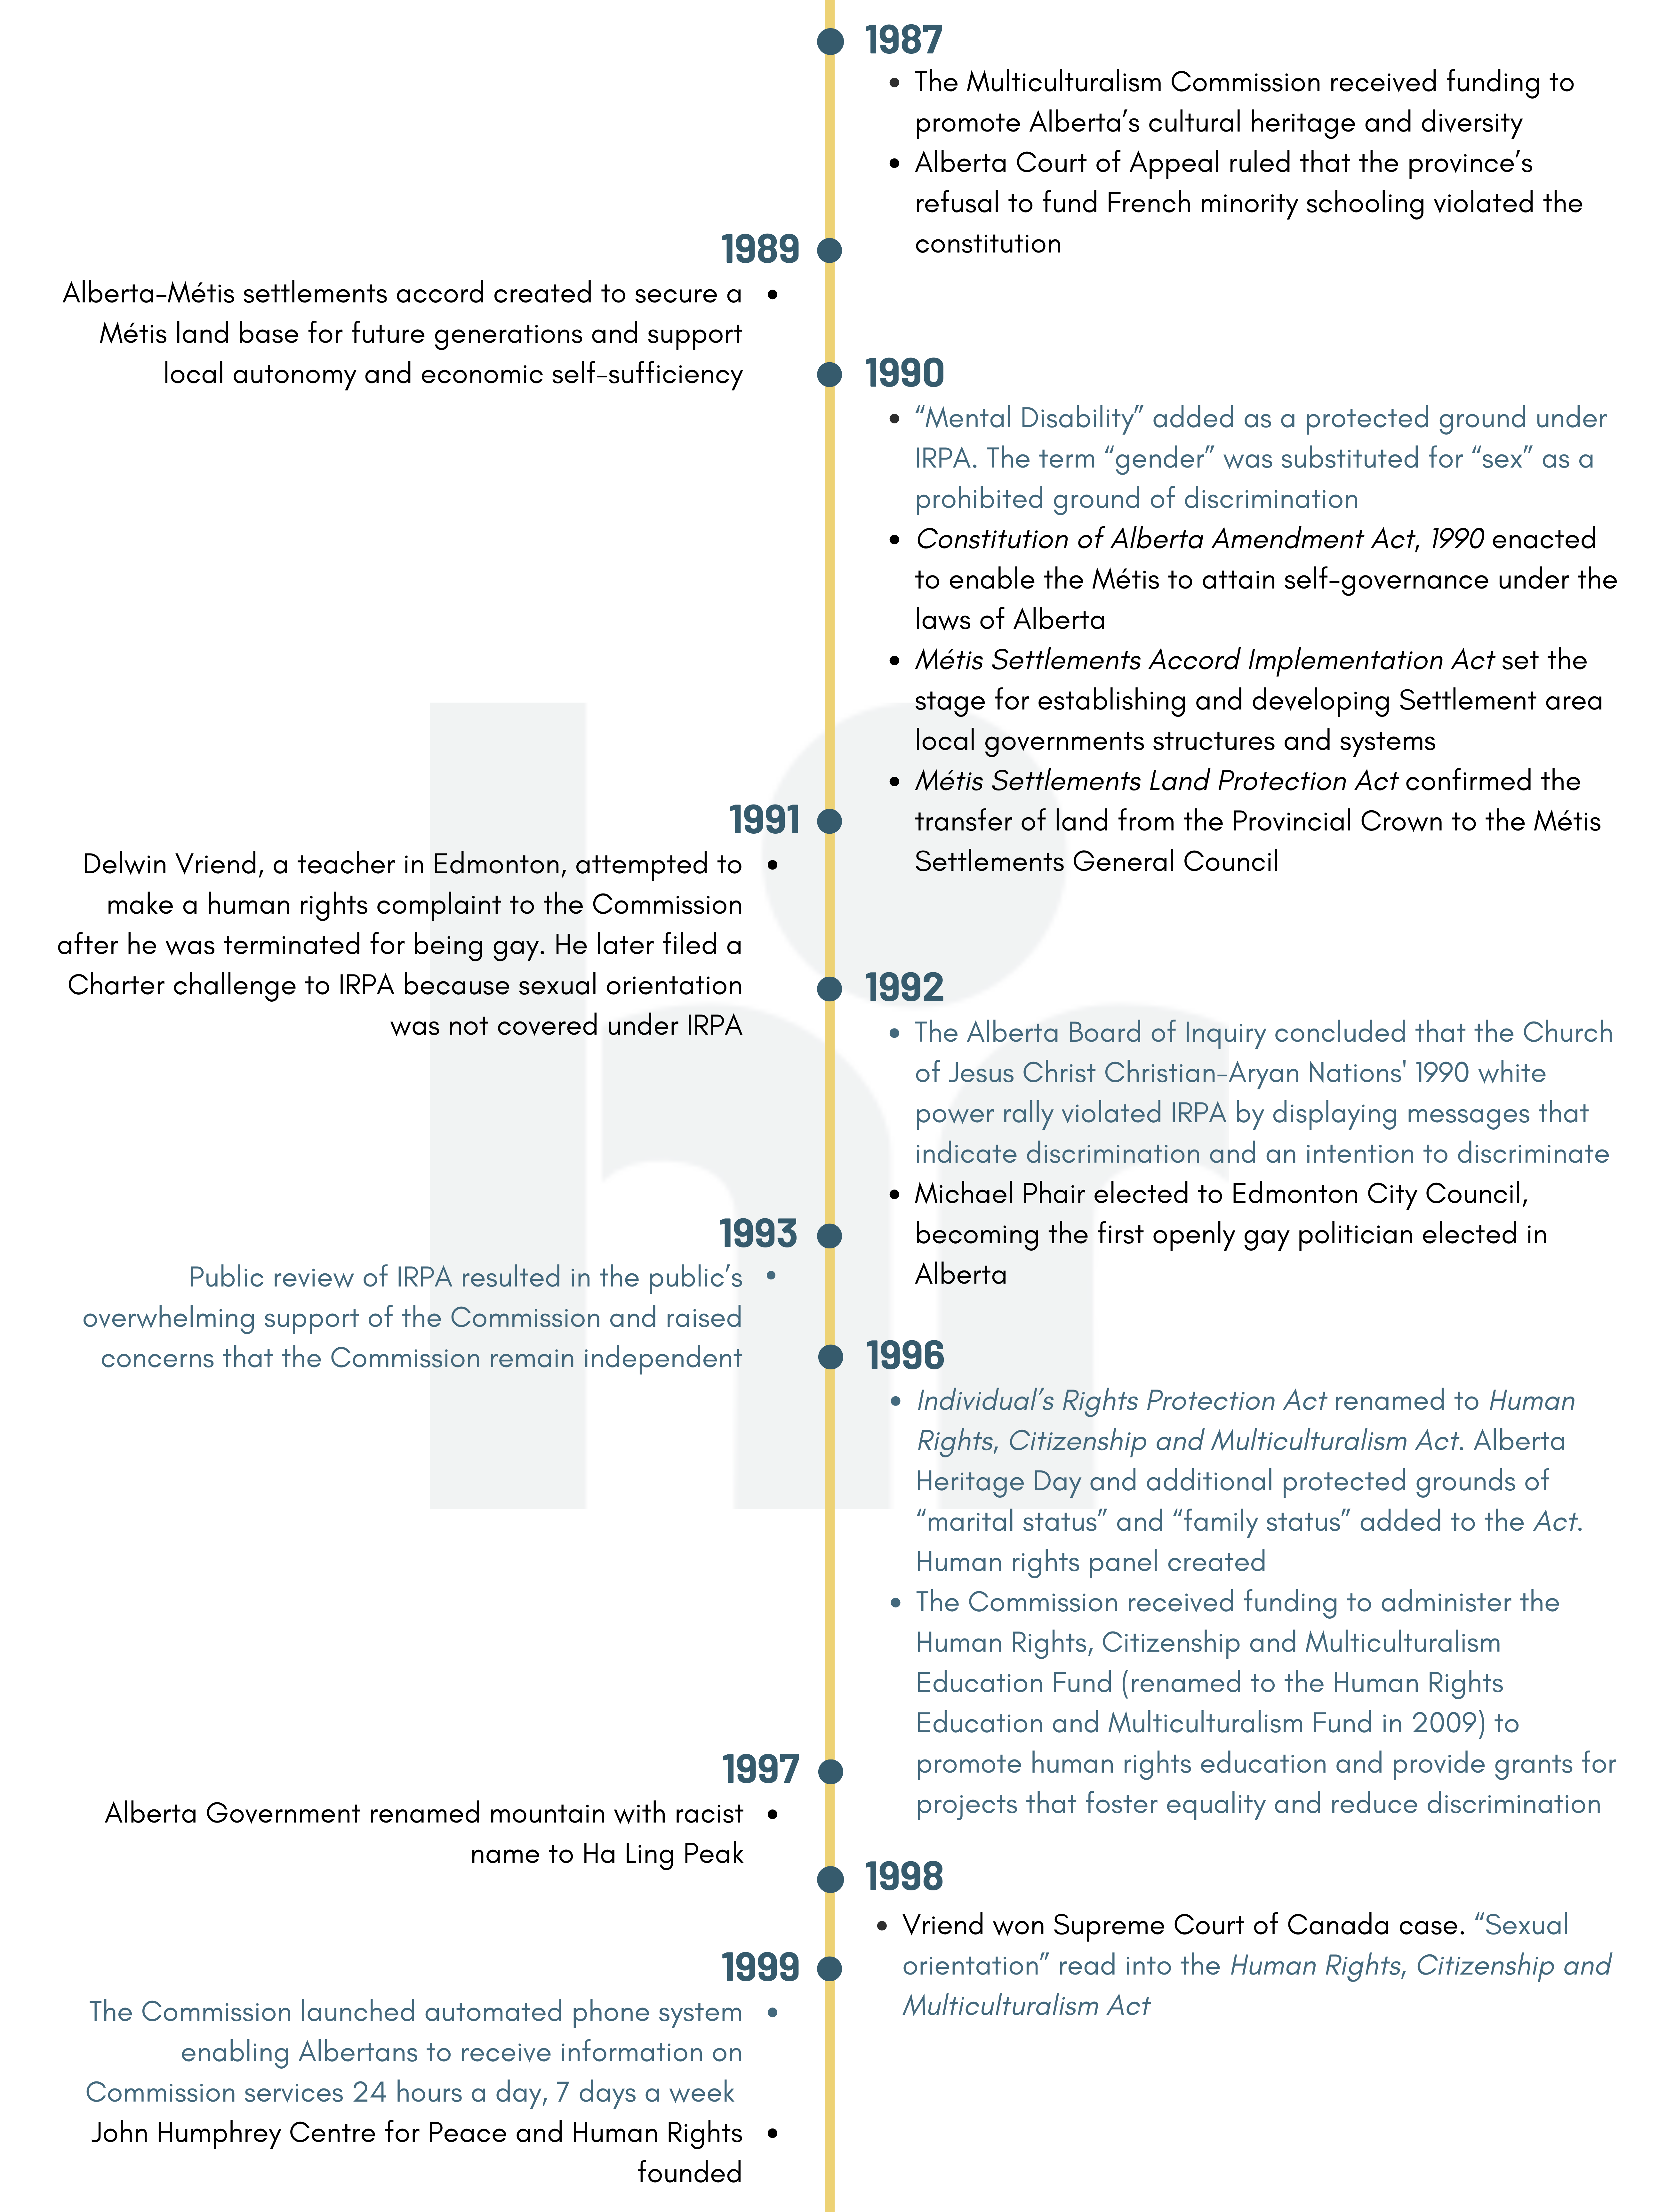 Graphic - Timeline from 1987 to 1999 describing significant events in Alberta's human rights history.